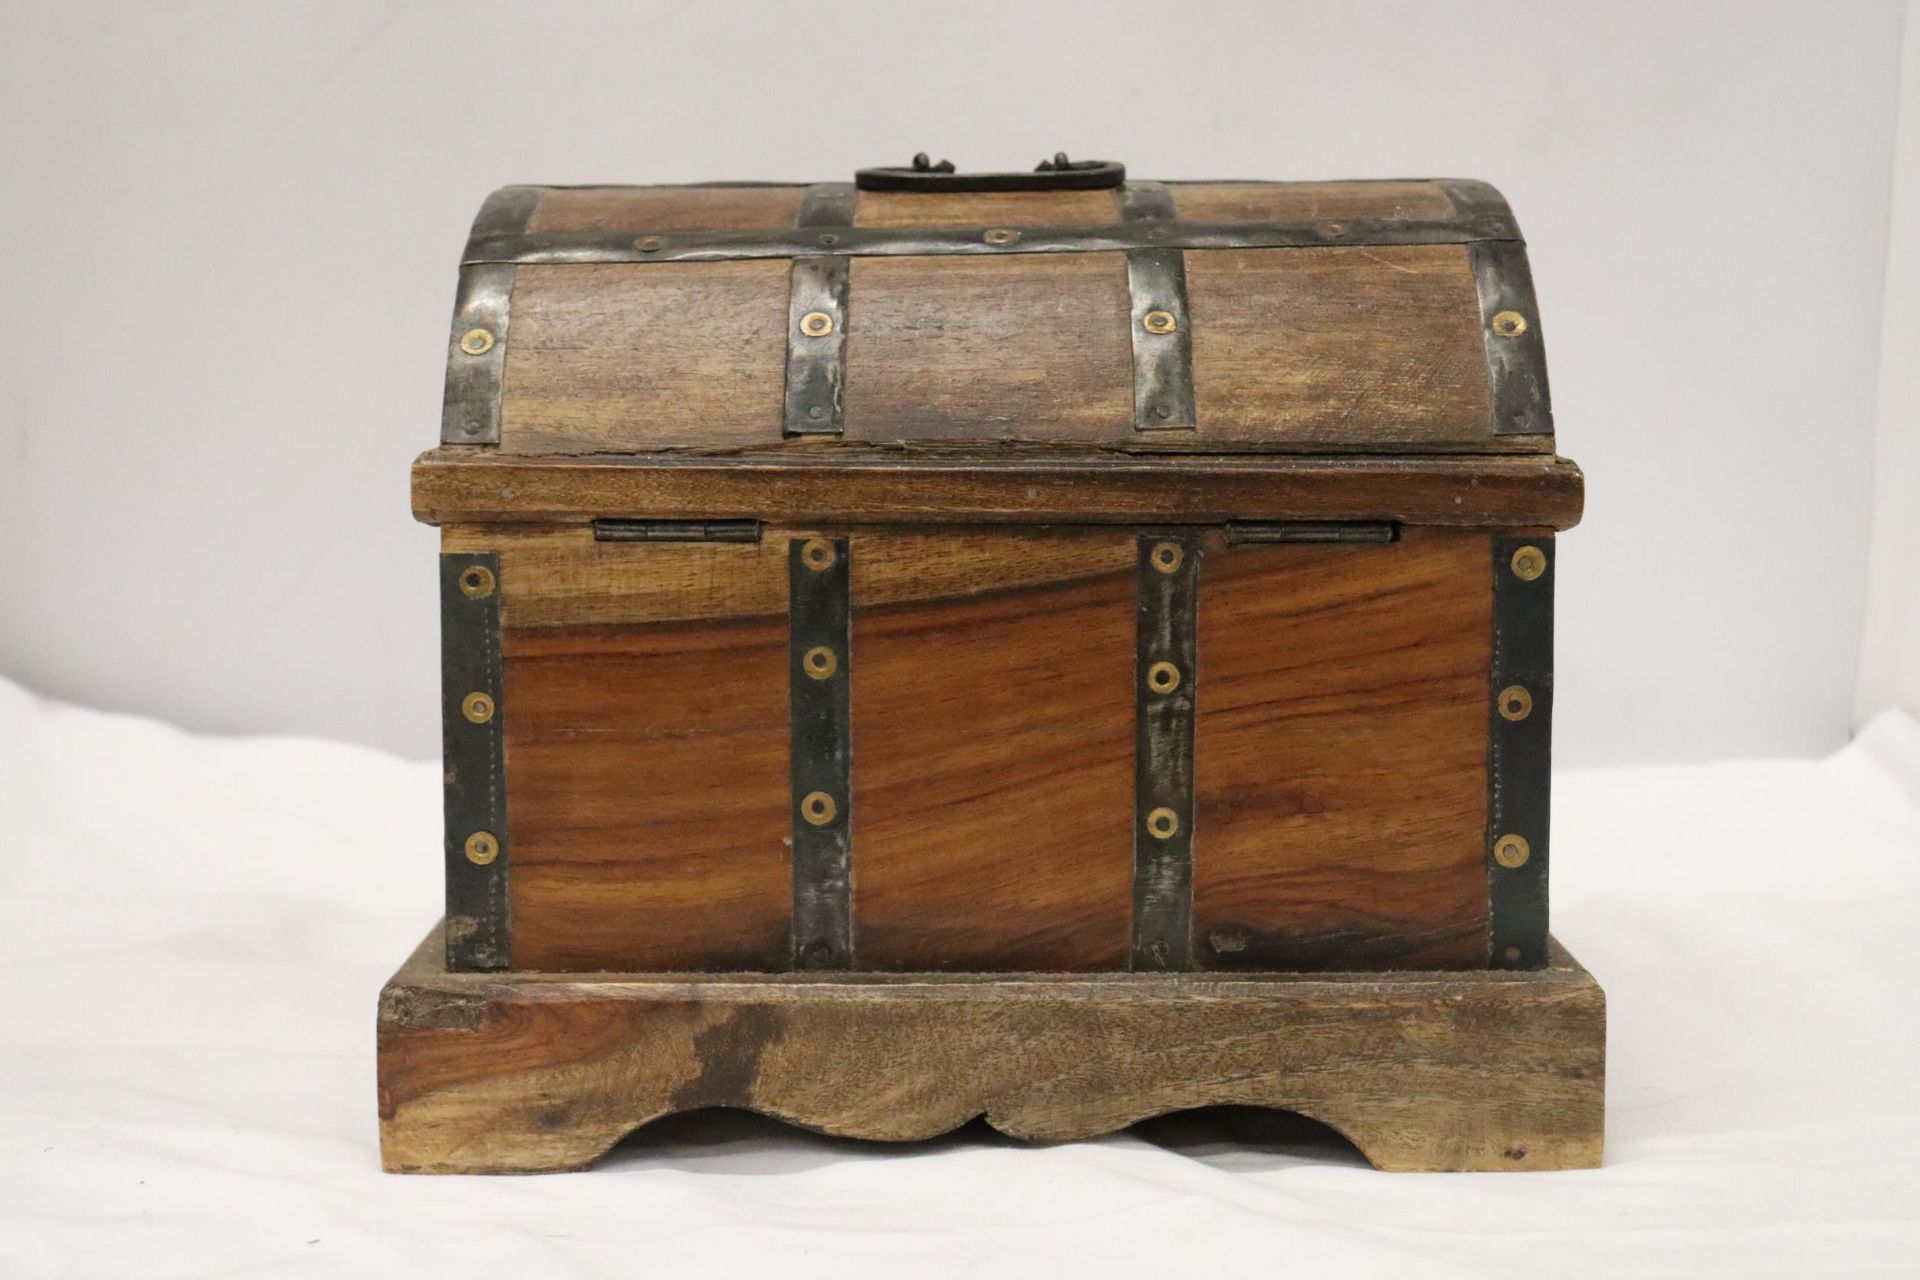 A VINTAGE SMALL DOMED WOODEN CHEST WITH METAL BANDING AND TWO DRAWERS, HEIGHT 21CM, LENGTH 26CM, - Image 6 of 6